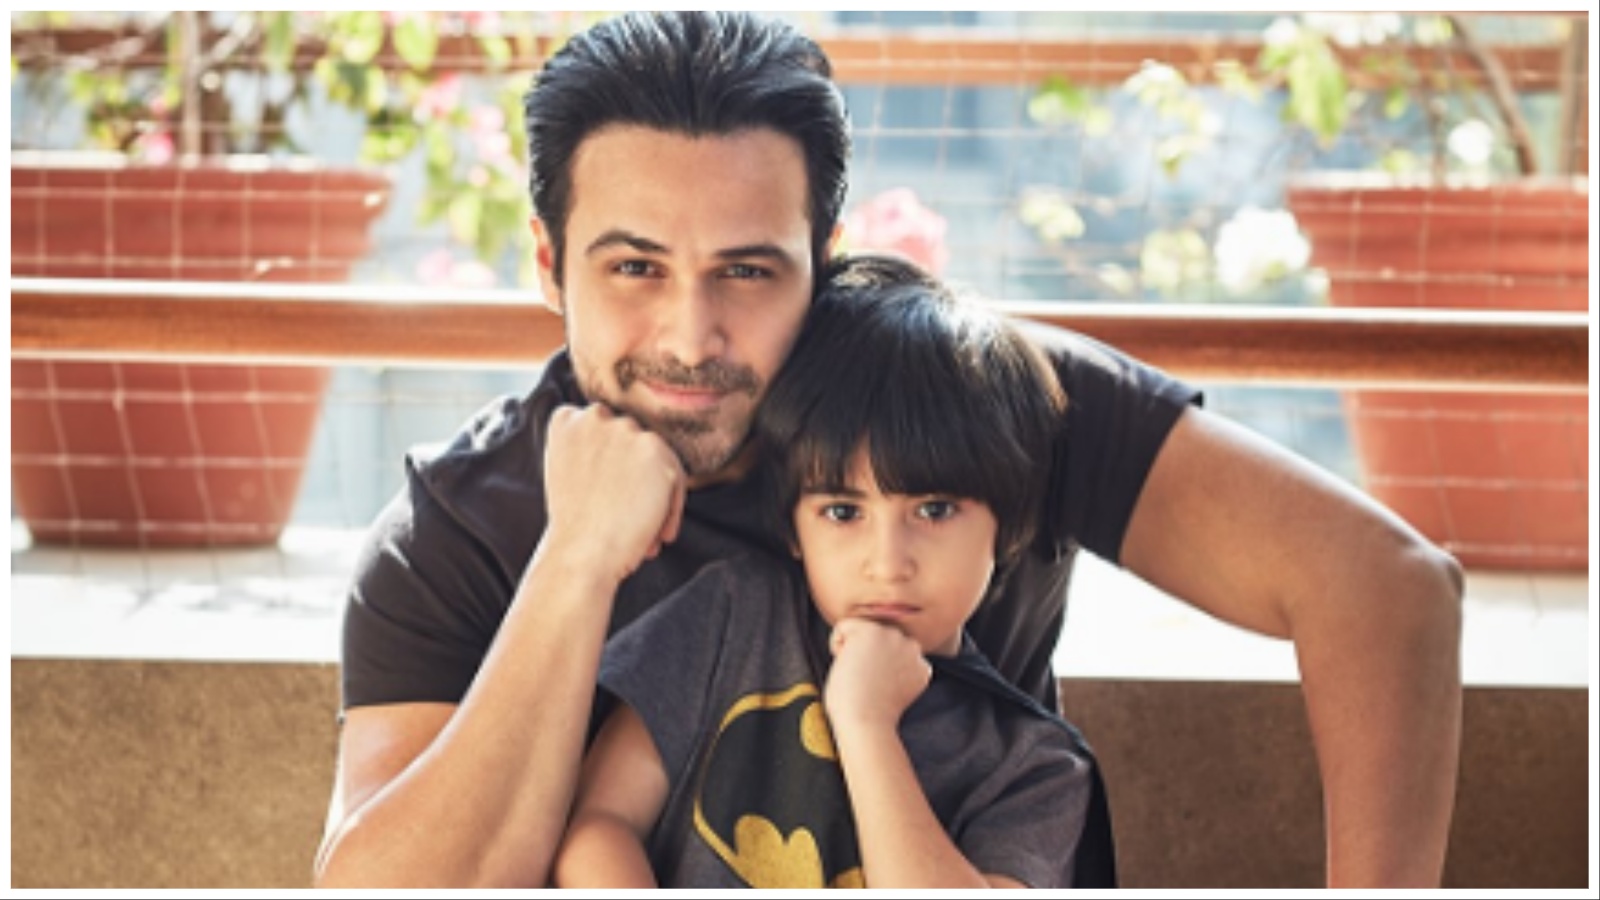 Emraan Hashmi's son Ayaan Hashmi was diagnosed with cancer in 2014